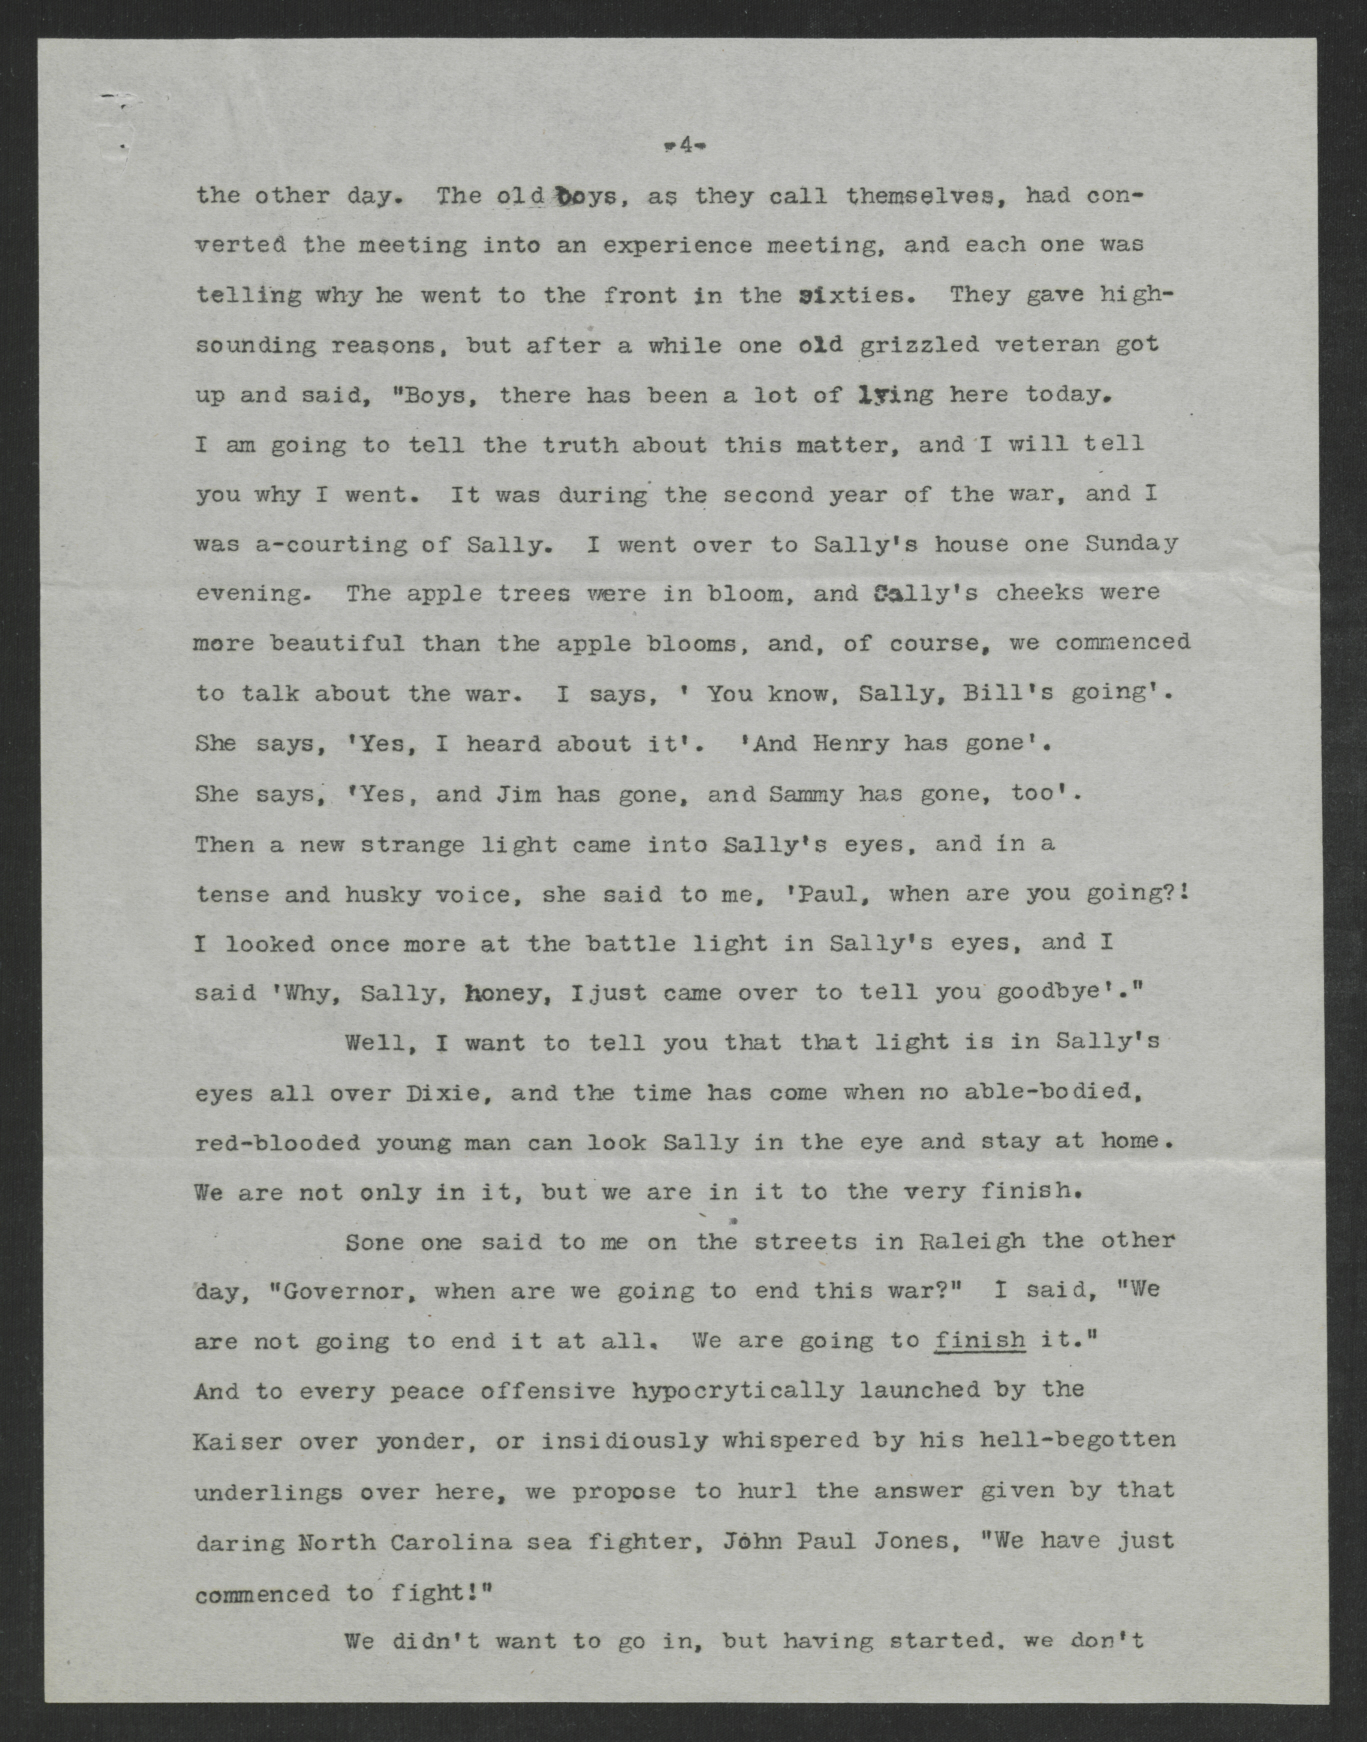 Address Delivered to the Conference of Governors by Governor Thomas W. Bickett, May 17, 1918, page 4